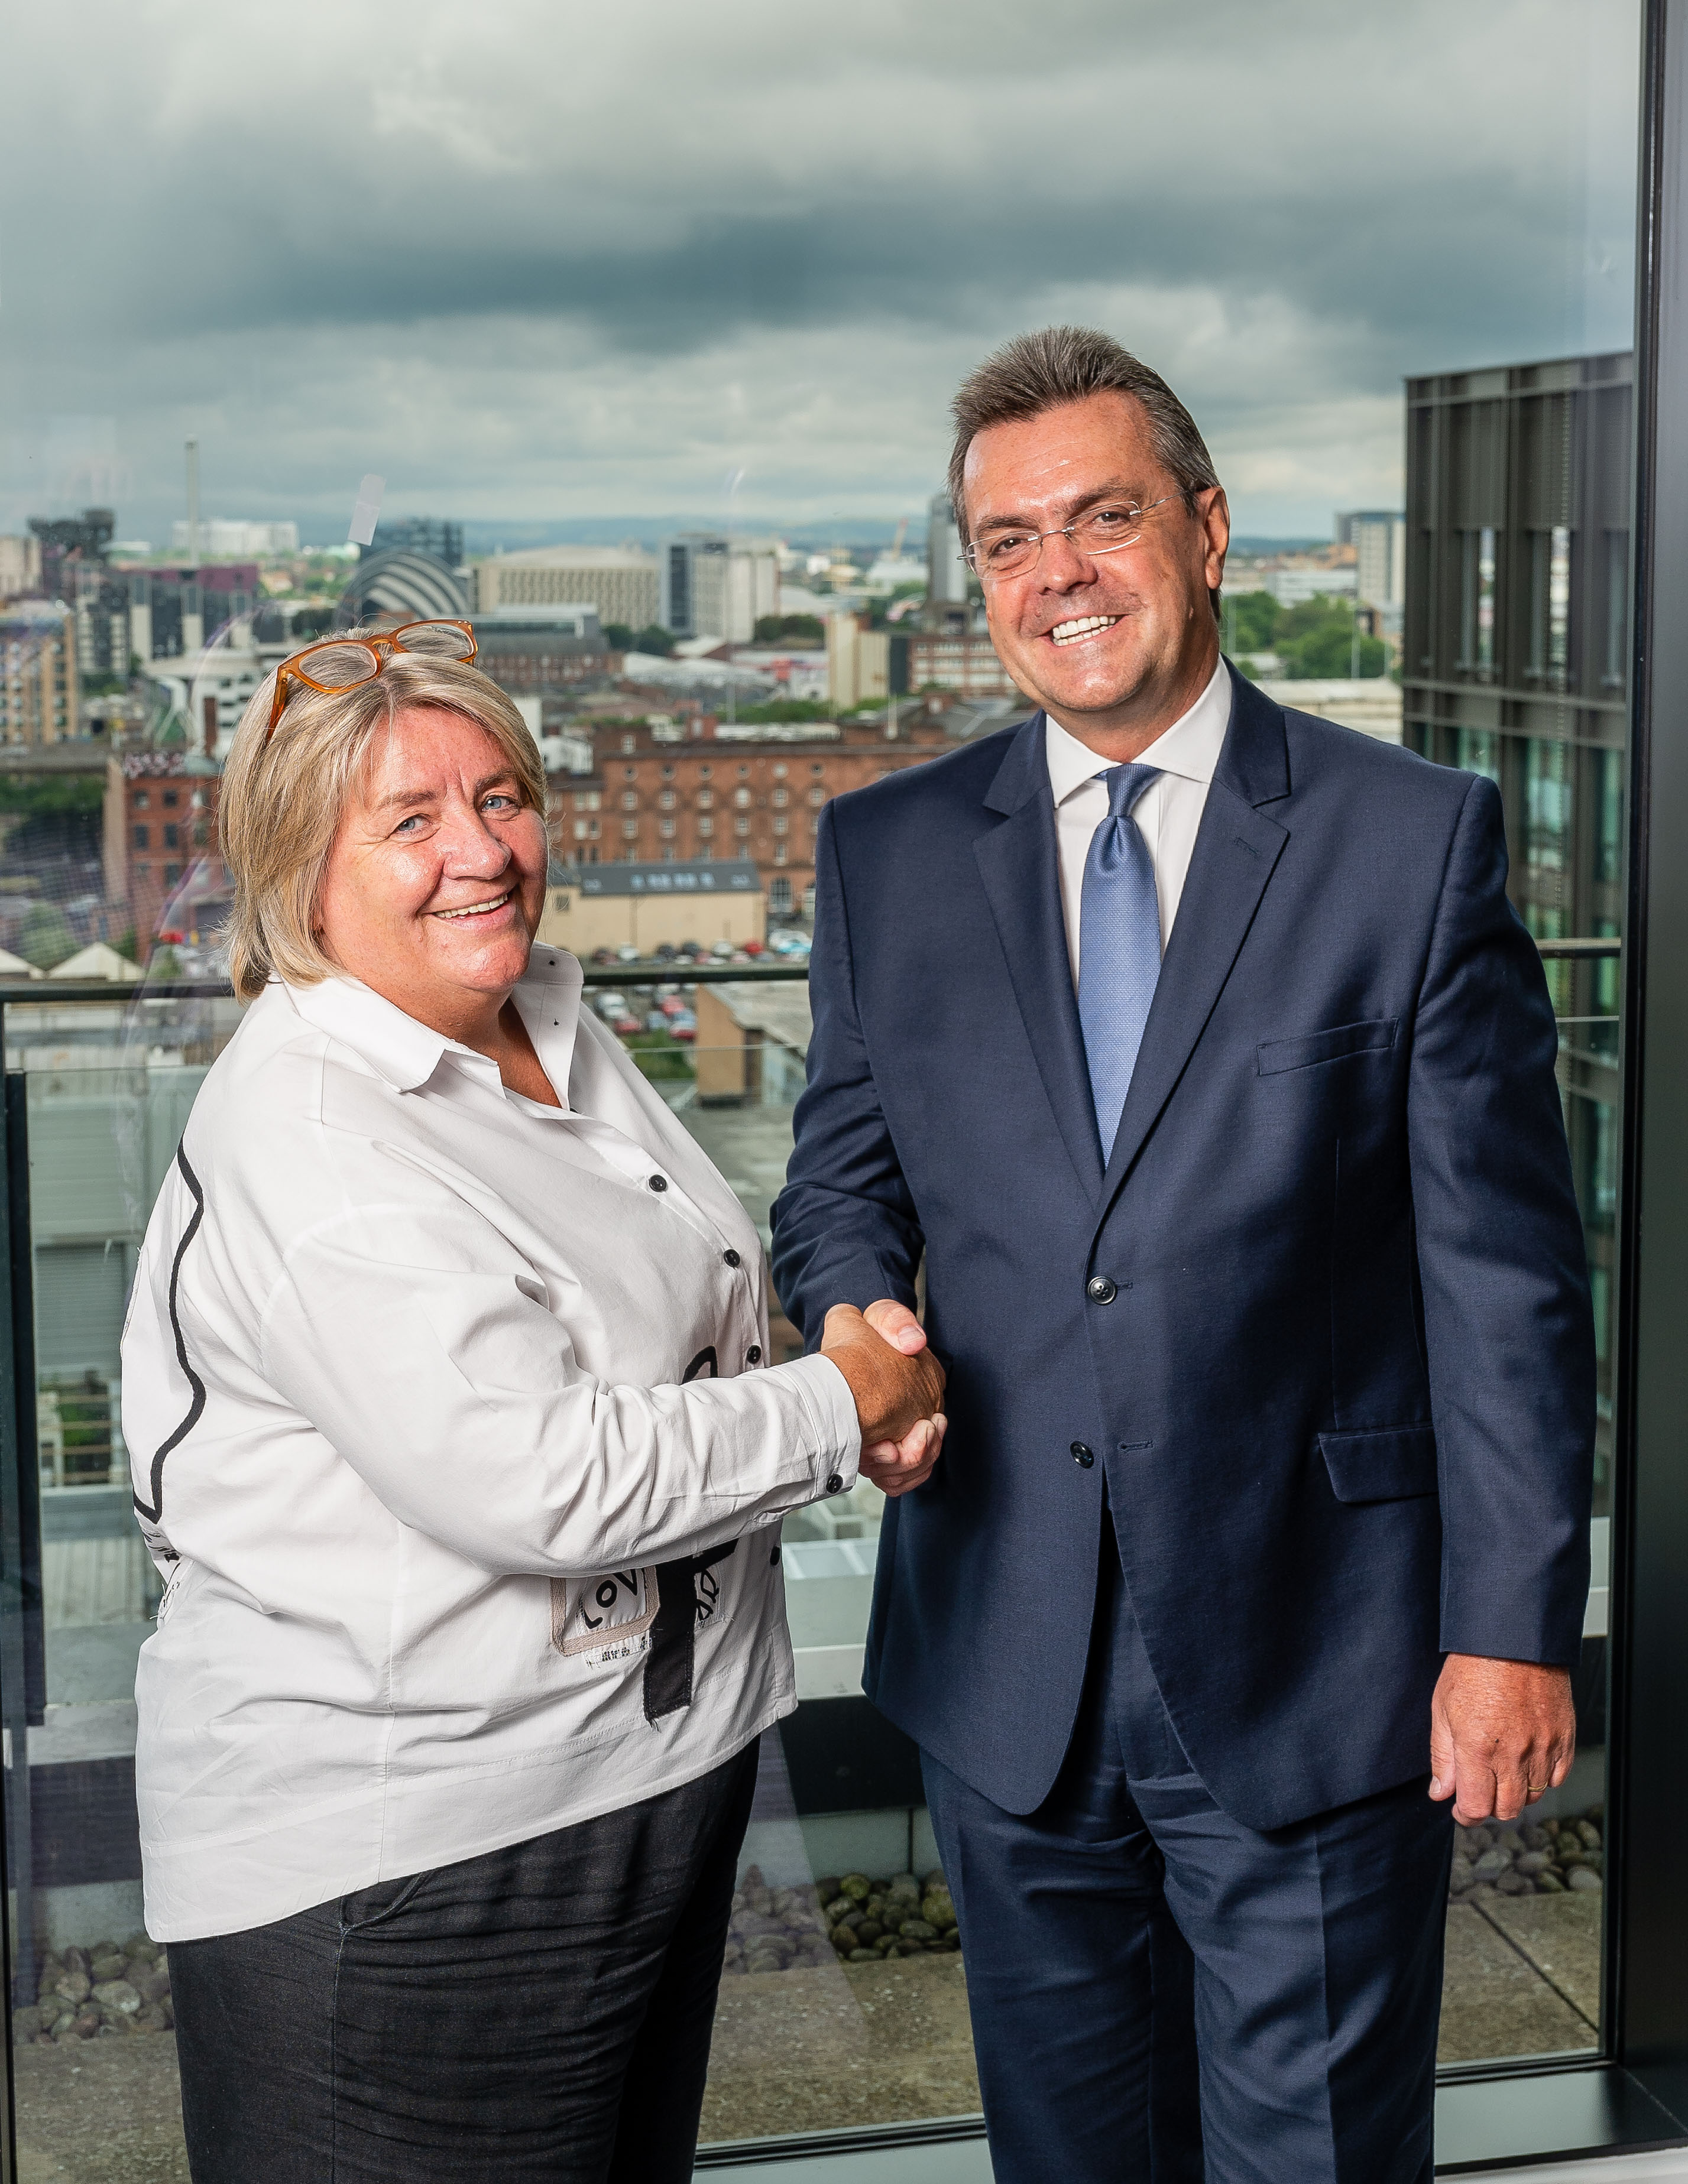 Strathspey Capital becomes largest factoring firm in Scotland with acquisition of Speirs Gumley